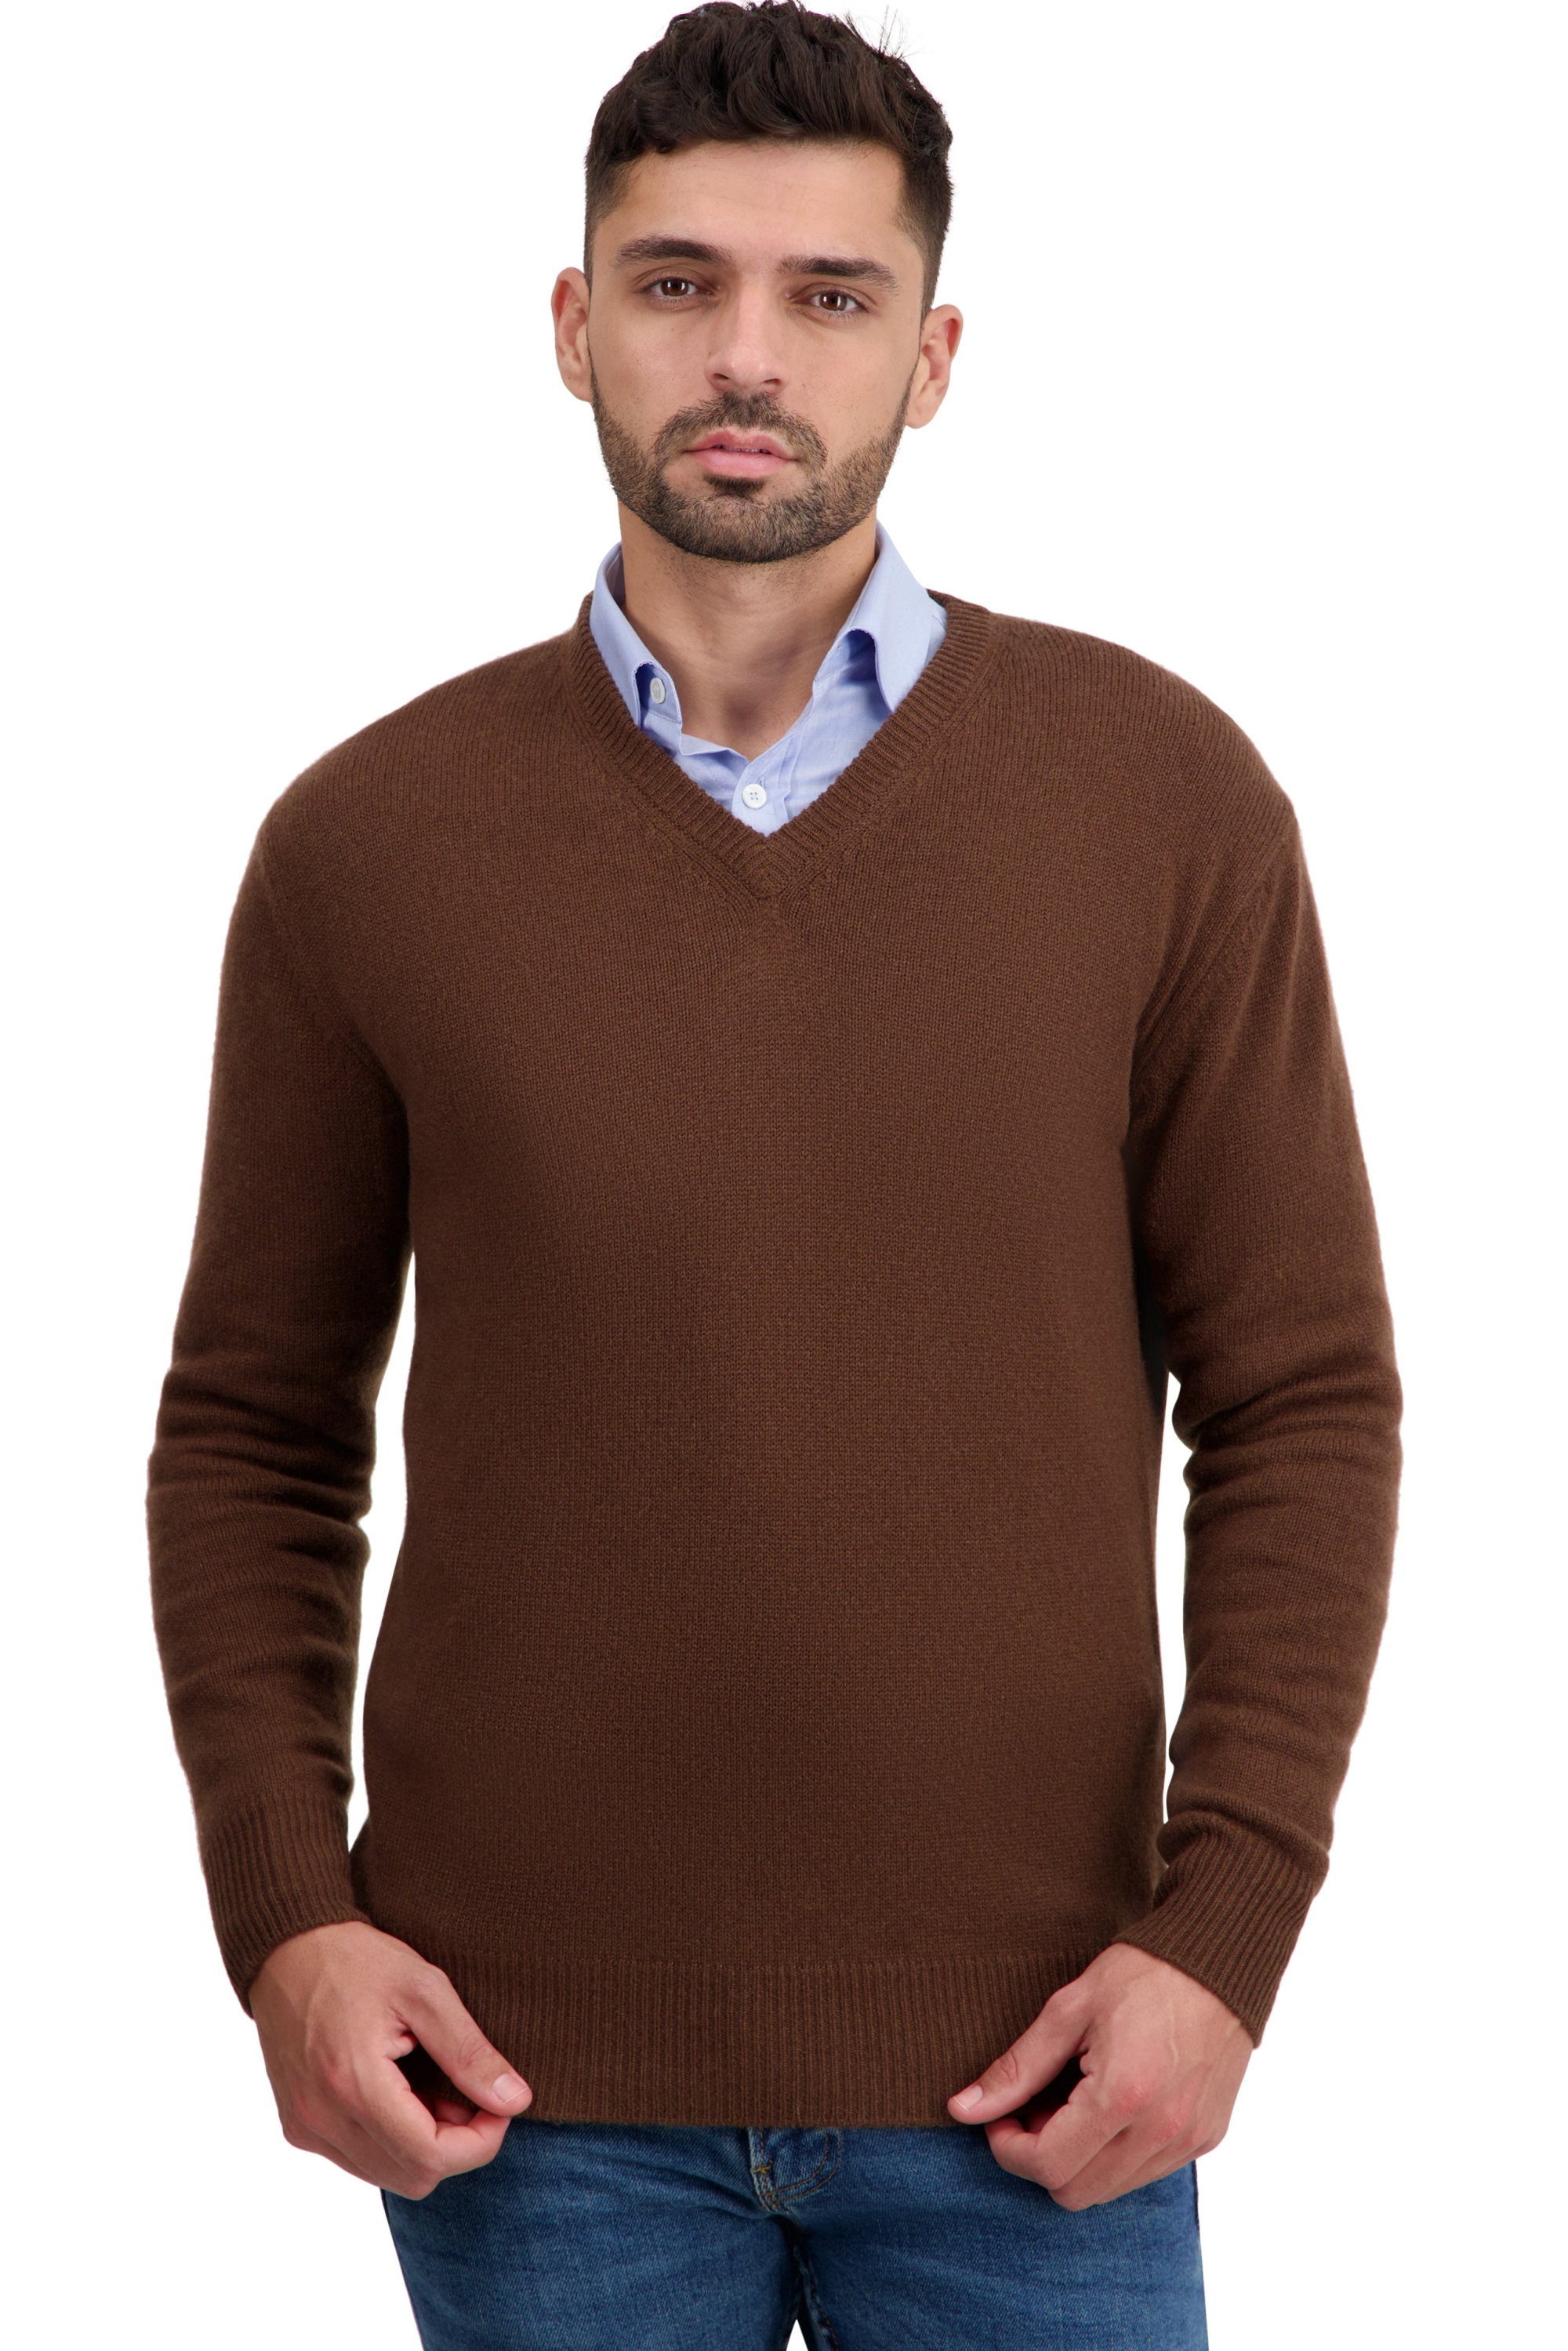 Cashmere men basic sweaters at low prices tour first dark camel 3xl